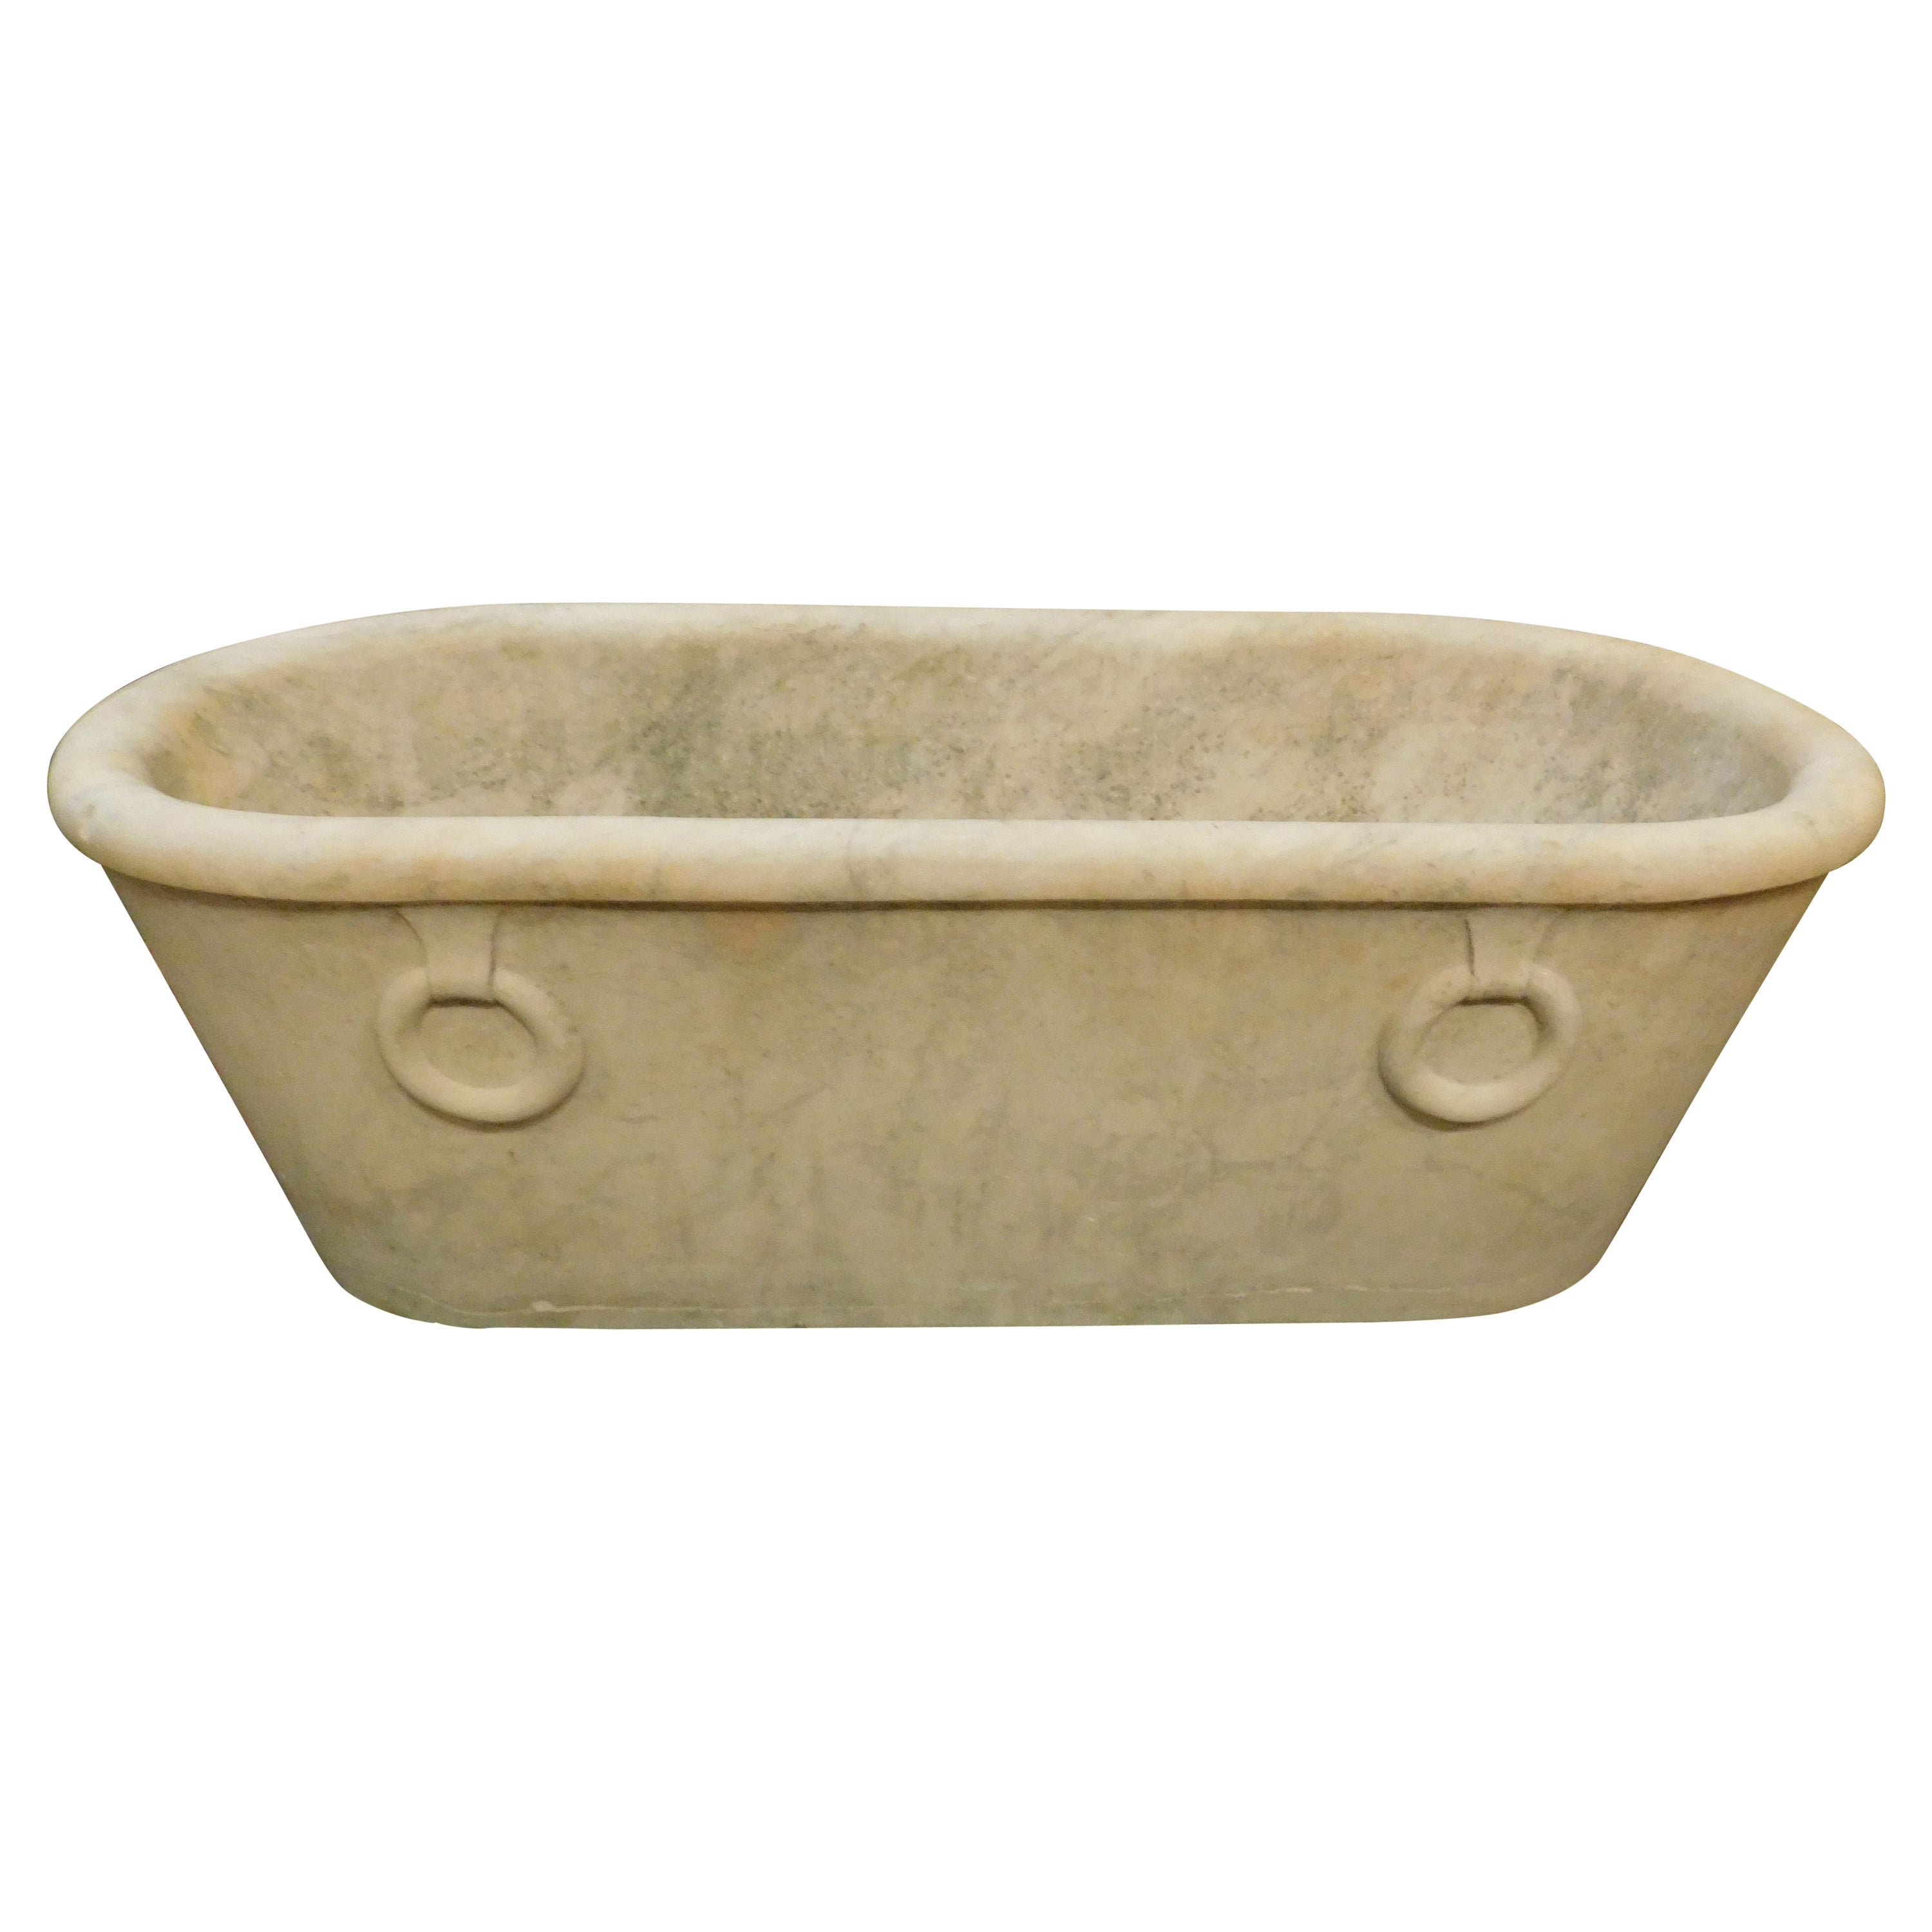 Antique Tub in White Marble, Sculpted, 19th Century Italy For Sale